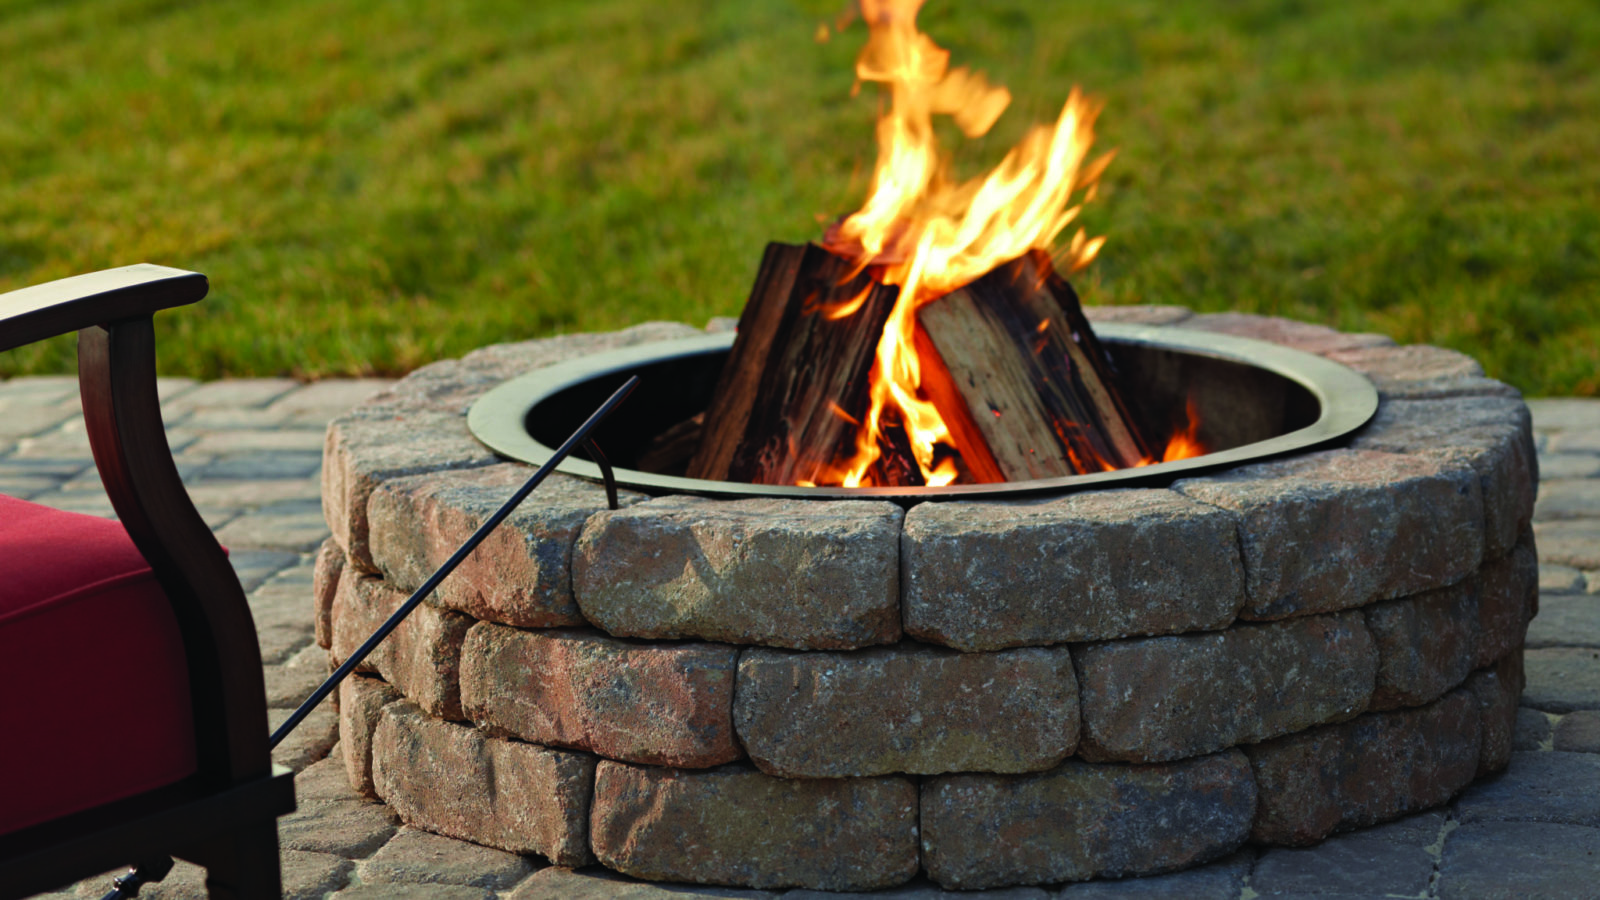 Gas Vs Wood Fire Pit Pros And Cons, Can I Burn Wood In A Gas Fire Pit